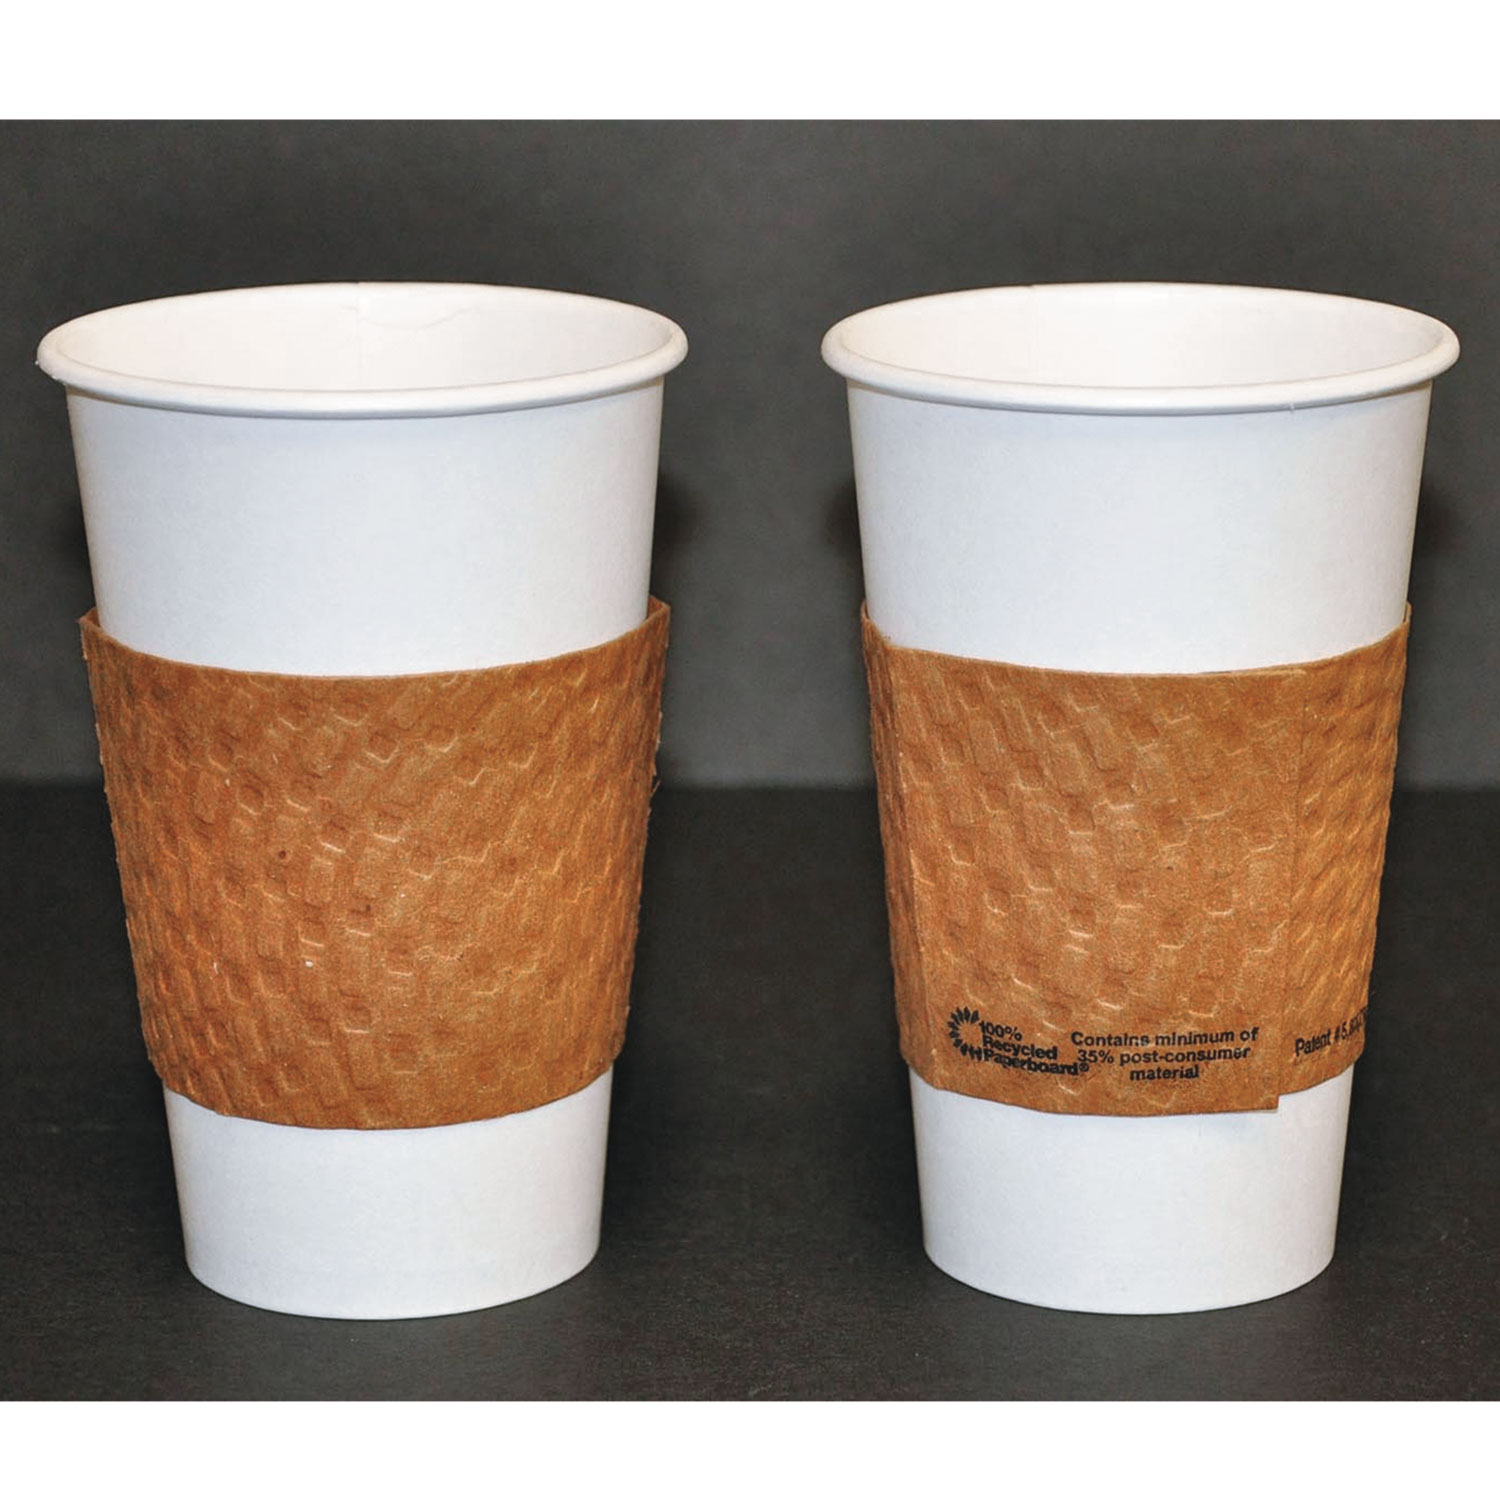 Kraft Hot Cup Sleeves, For 10-24 oz Cups, Brown, 1000/Carton